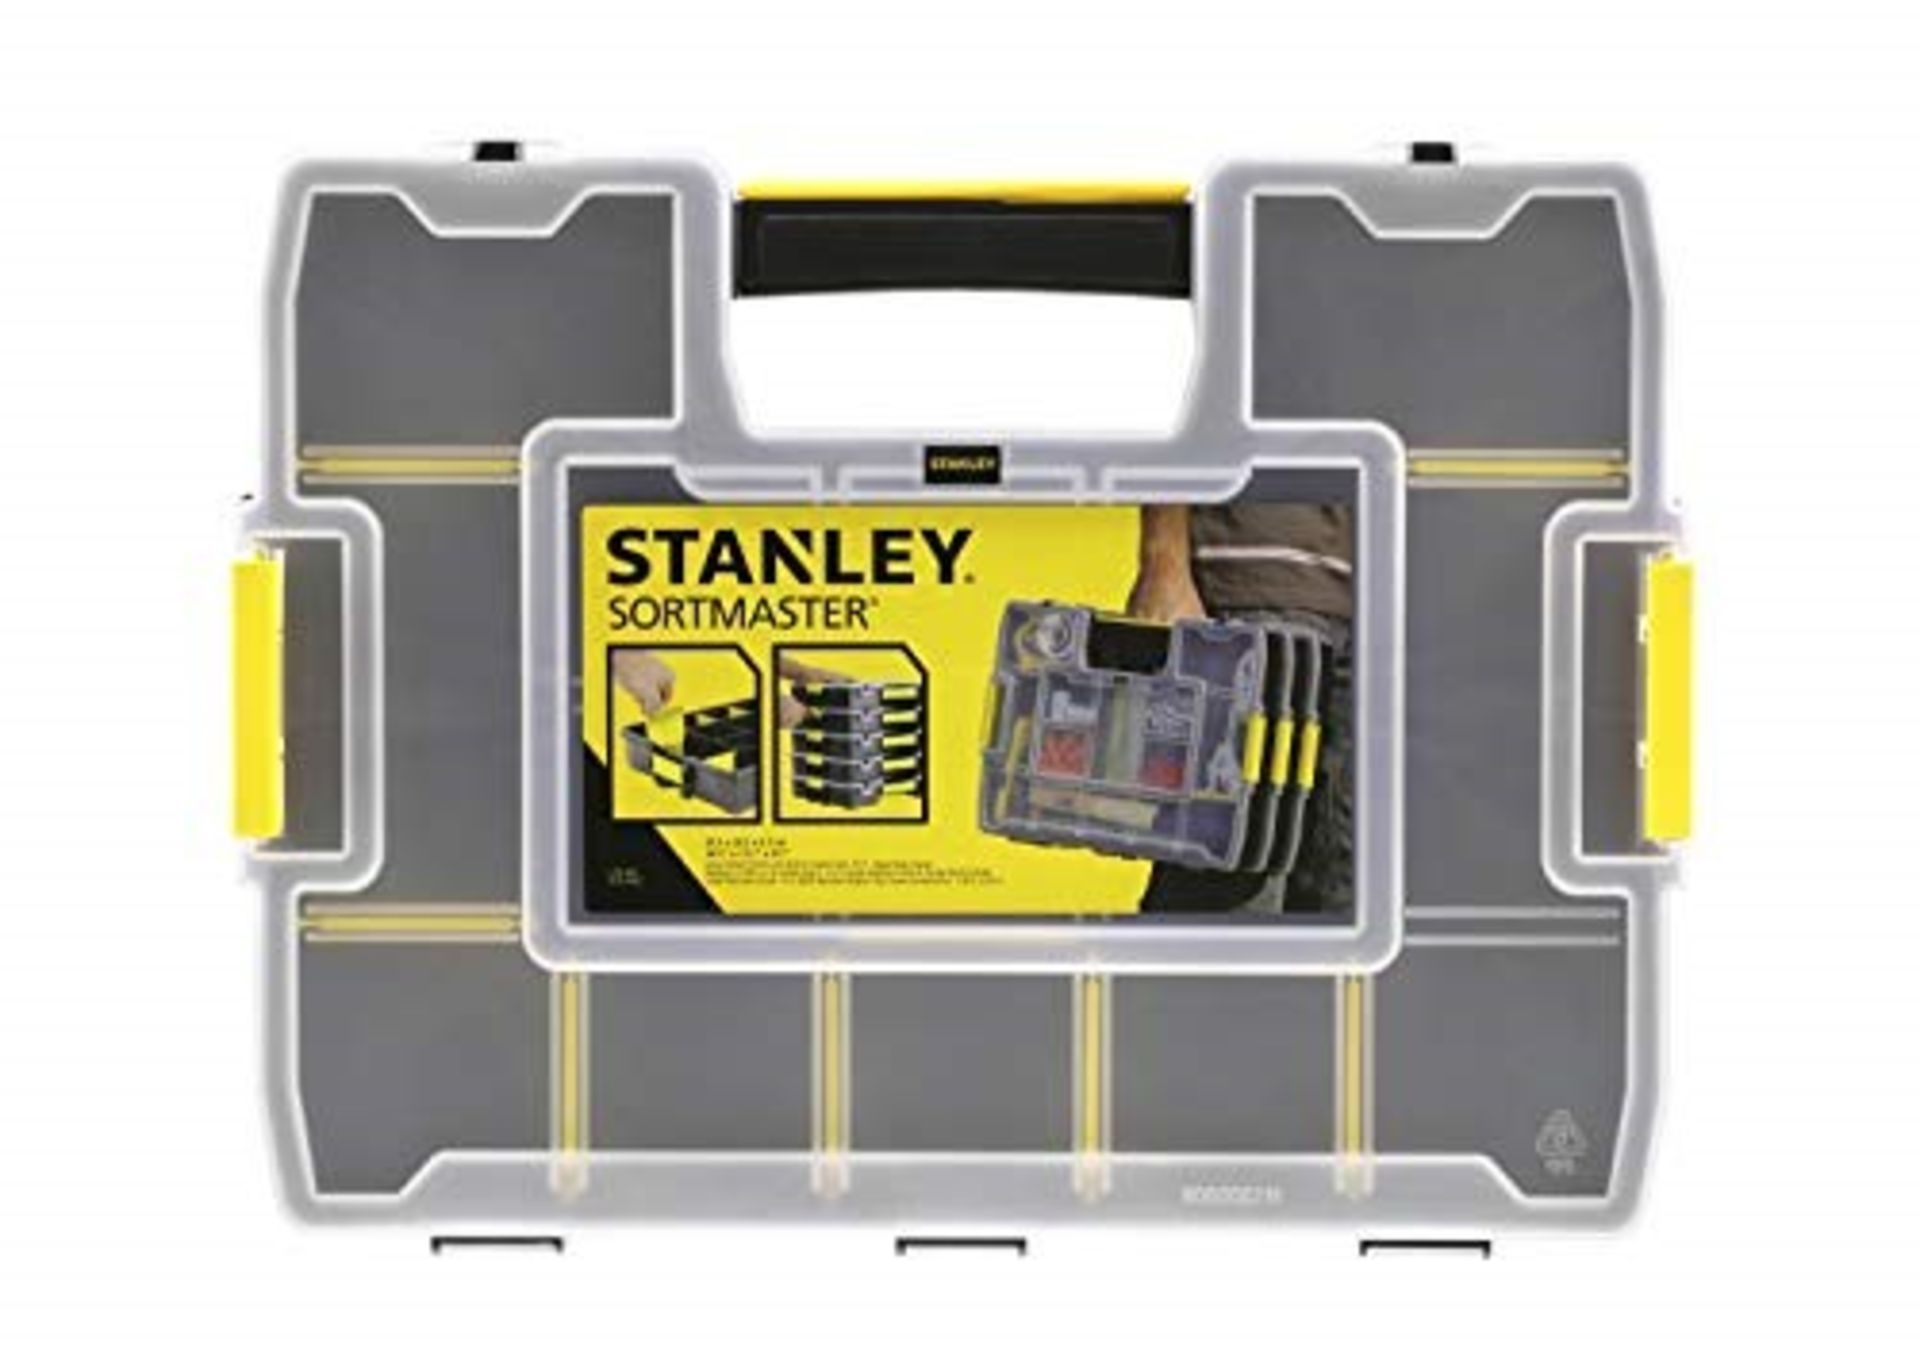 STANLEY Sortmaster Stackable Storage Organiser for Tools, Small Parts, Adjustable Comp